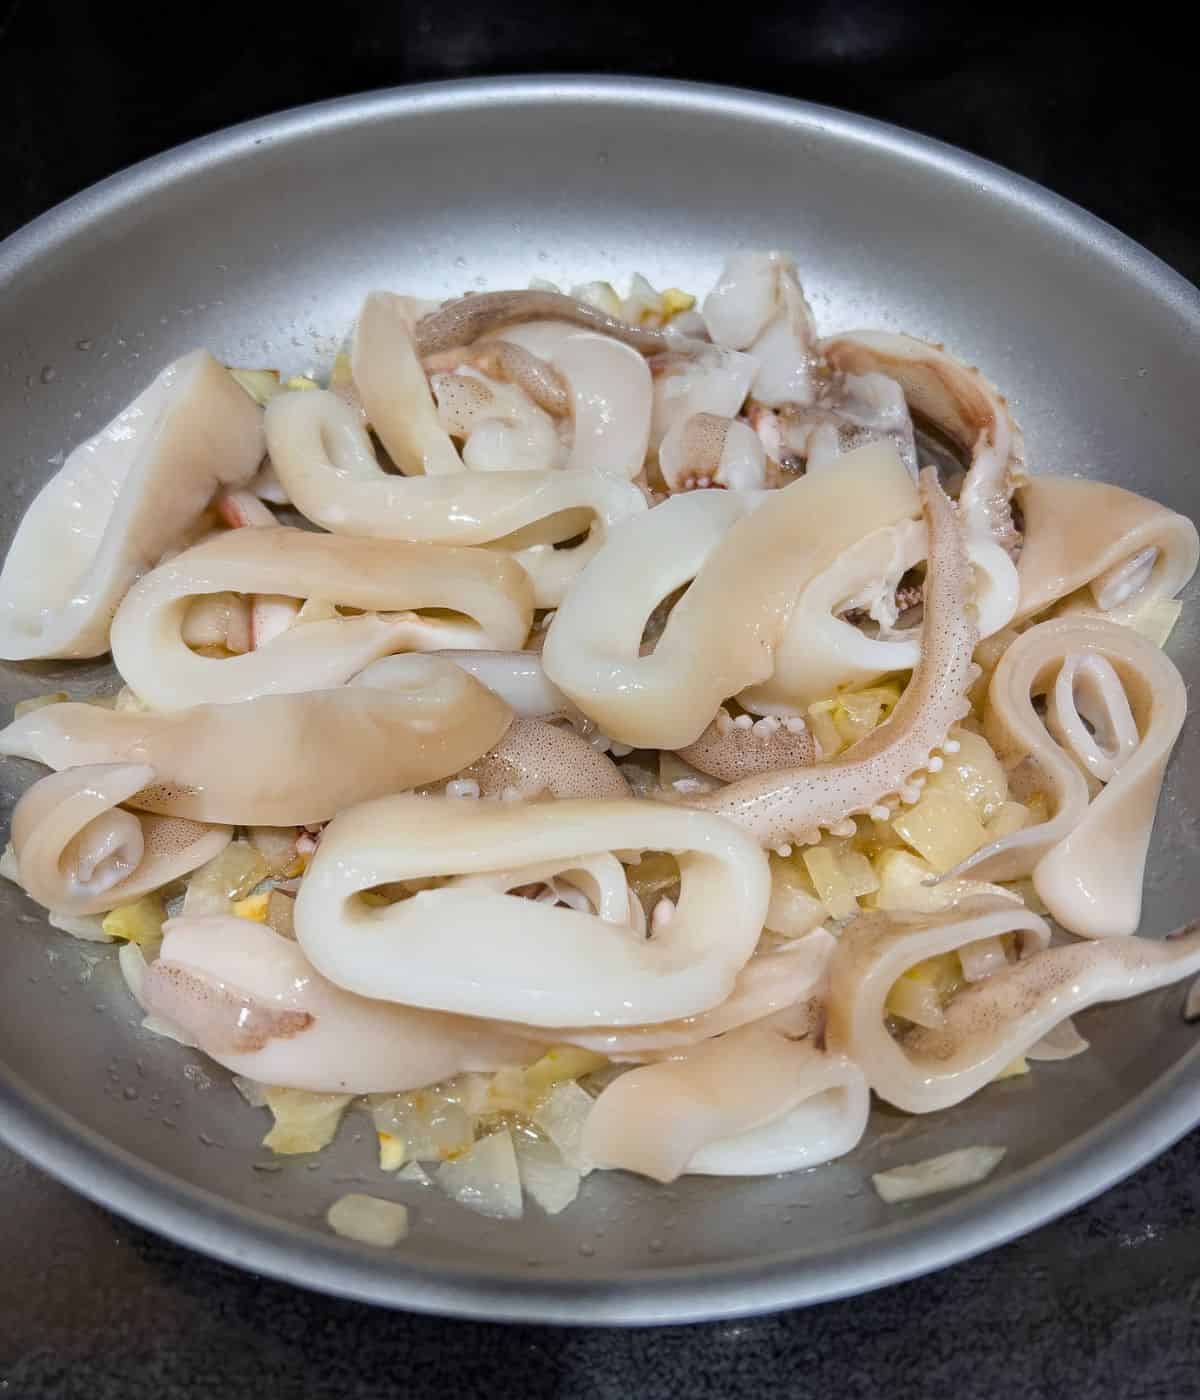 Adding the squid into the skillet.